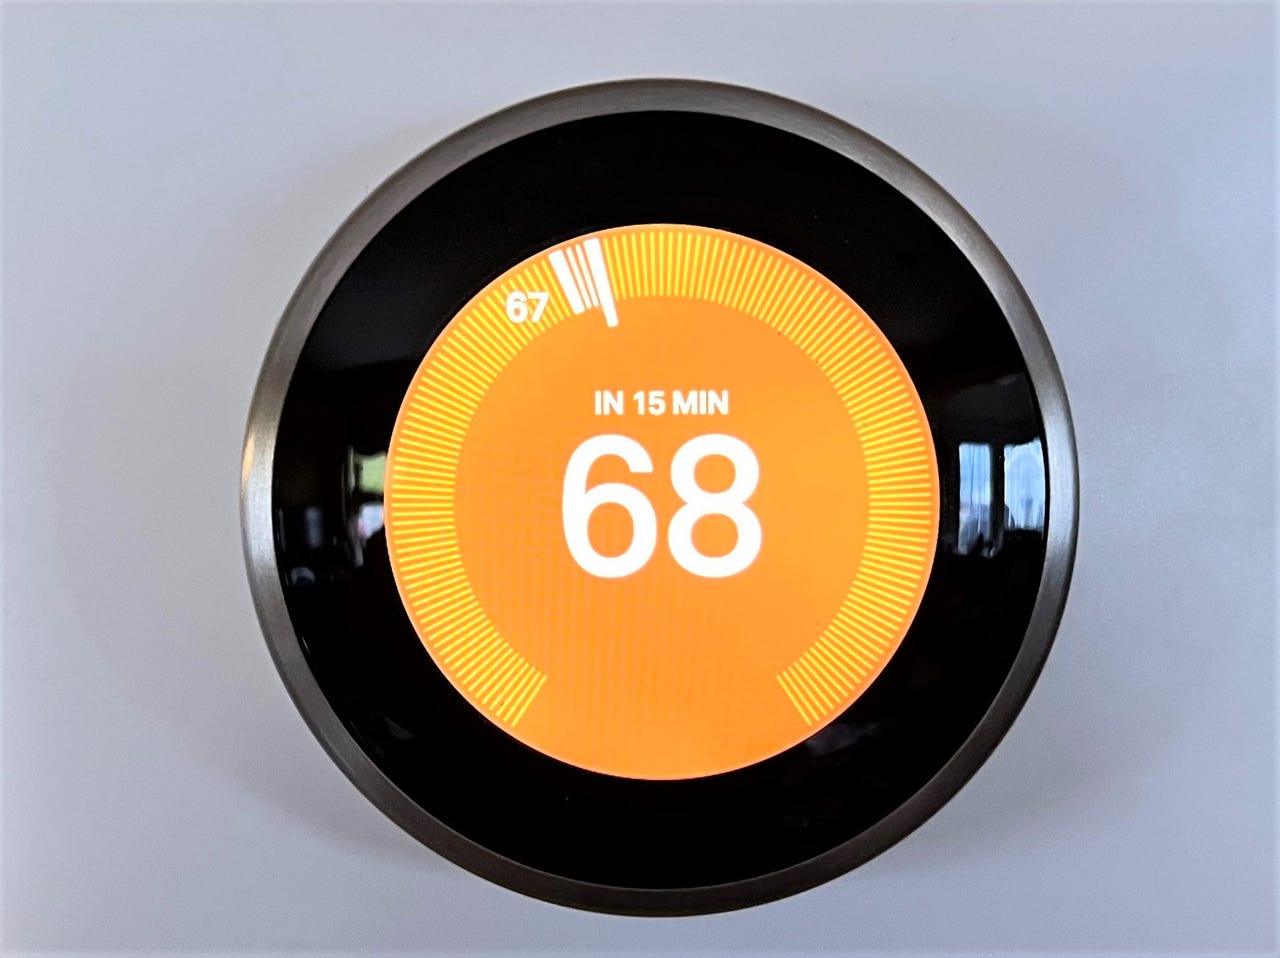 What Is Google Nest and How Does it Work?